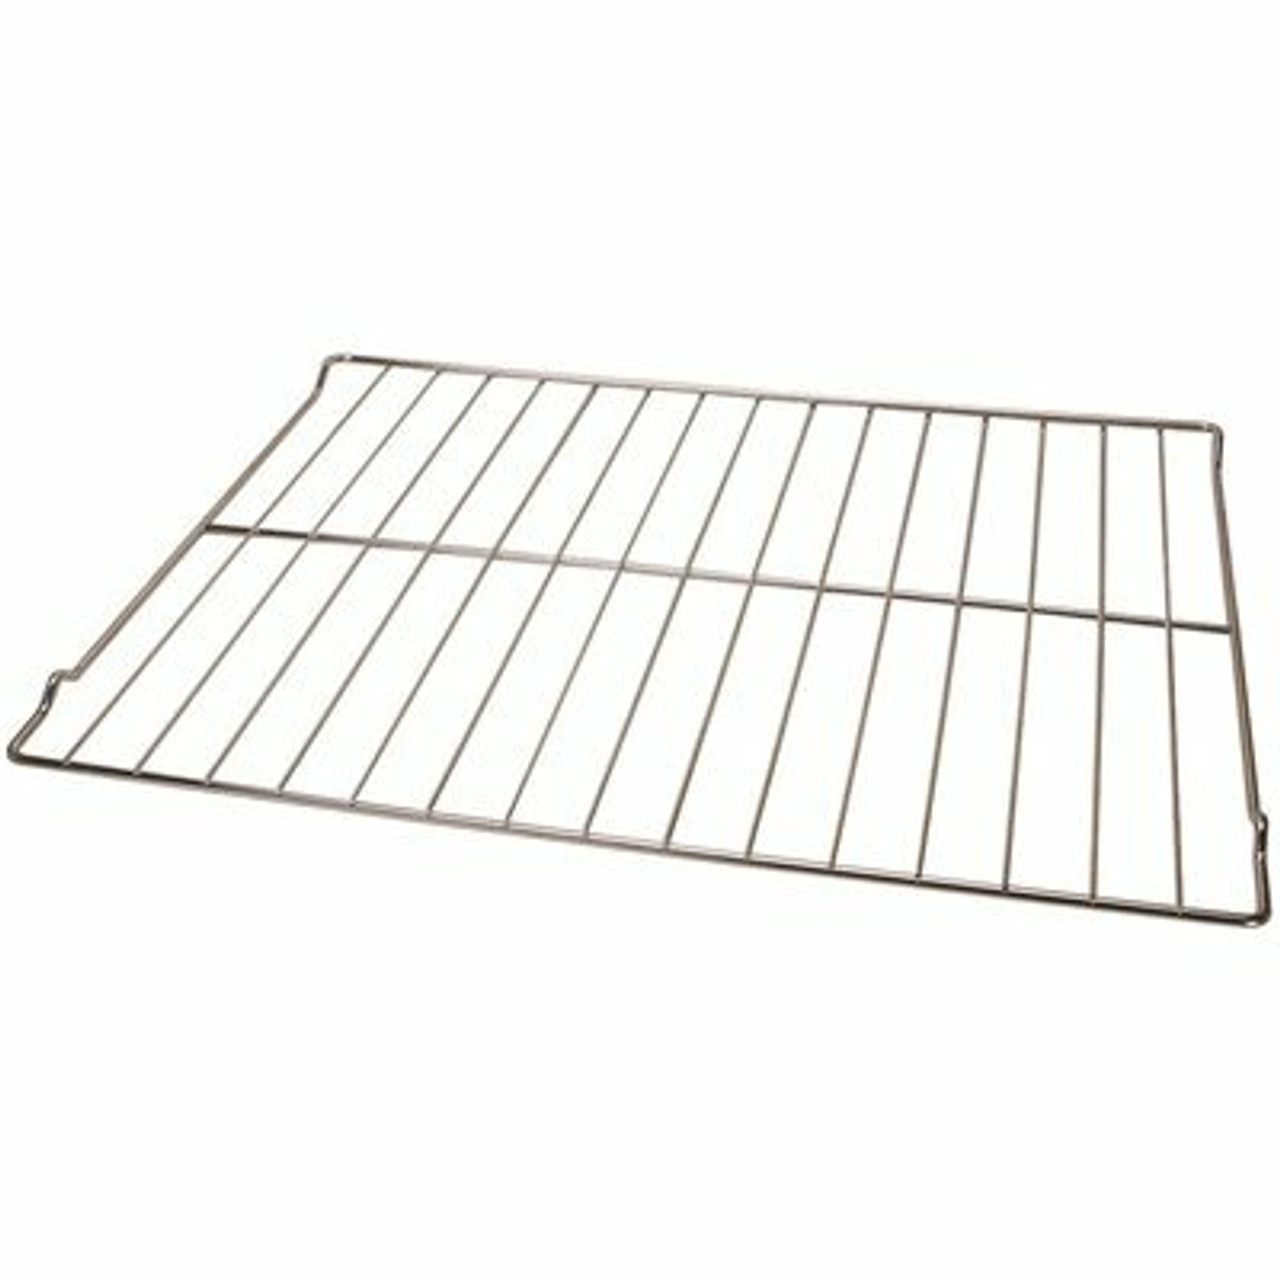 Exact Replacement Parts Oven Rack For Ge